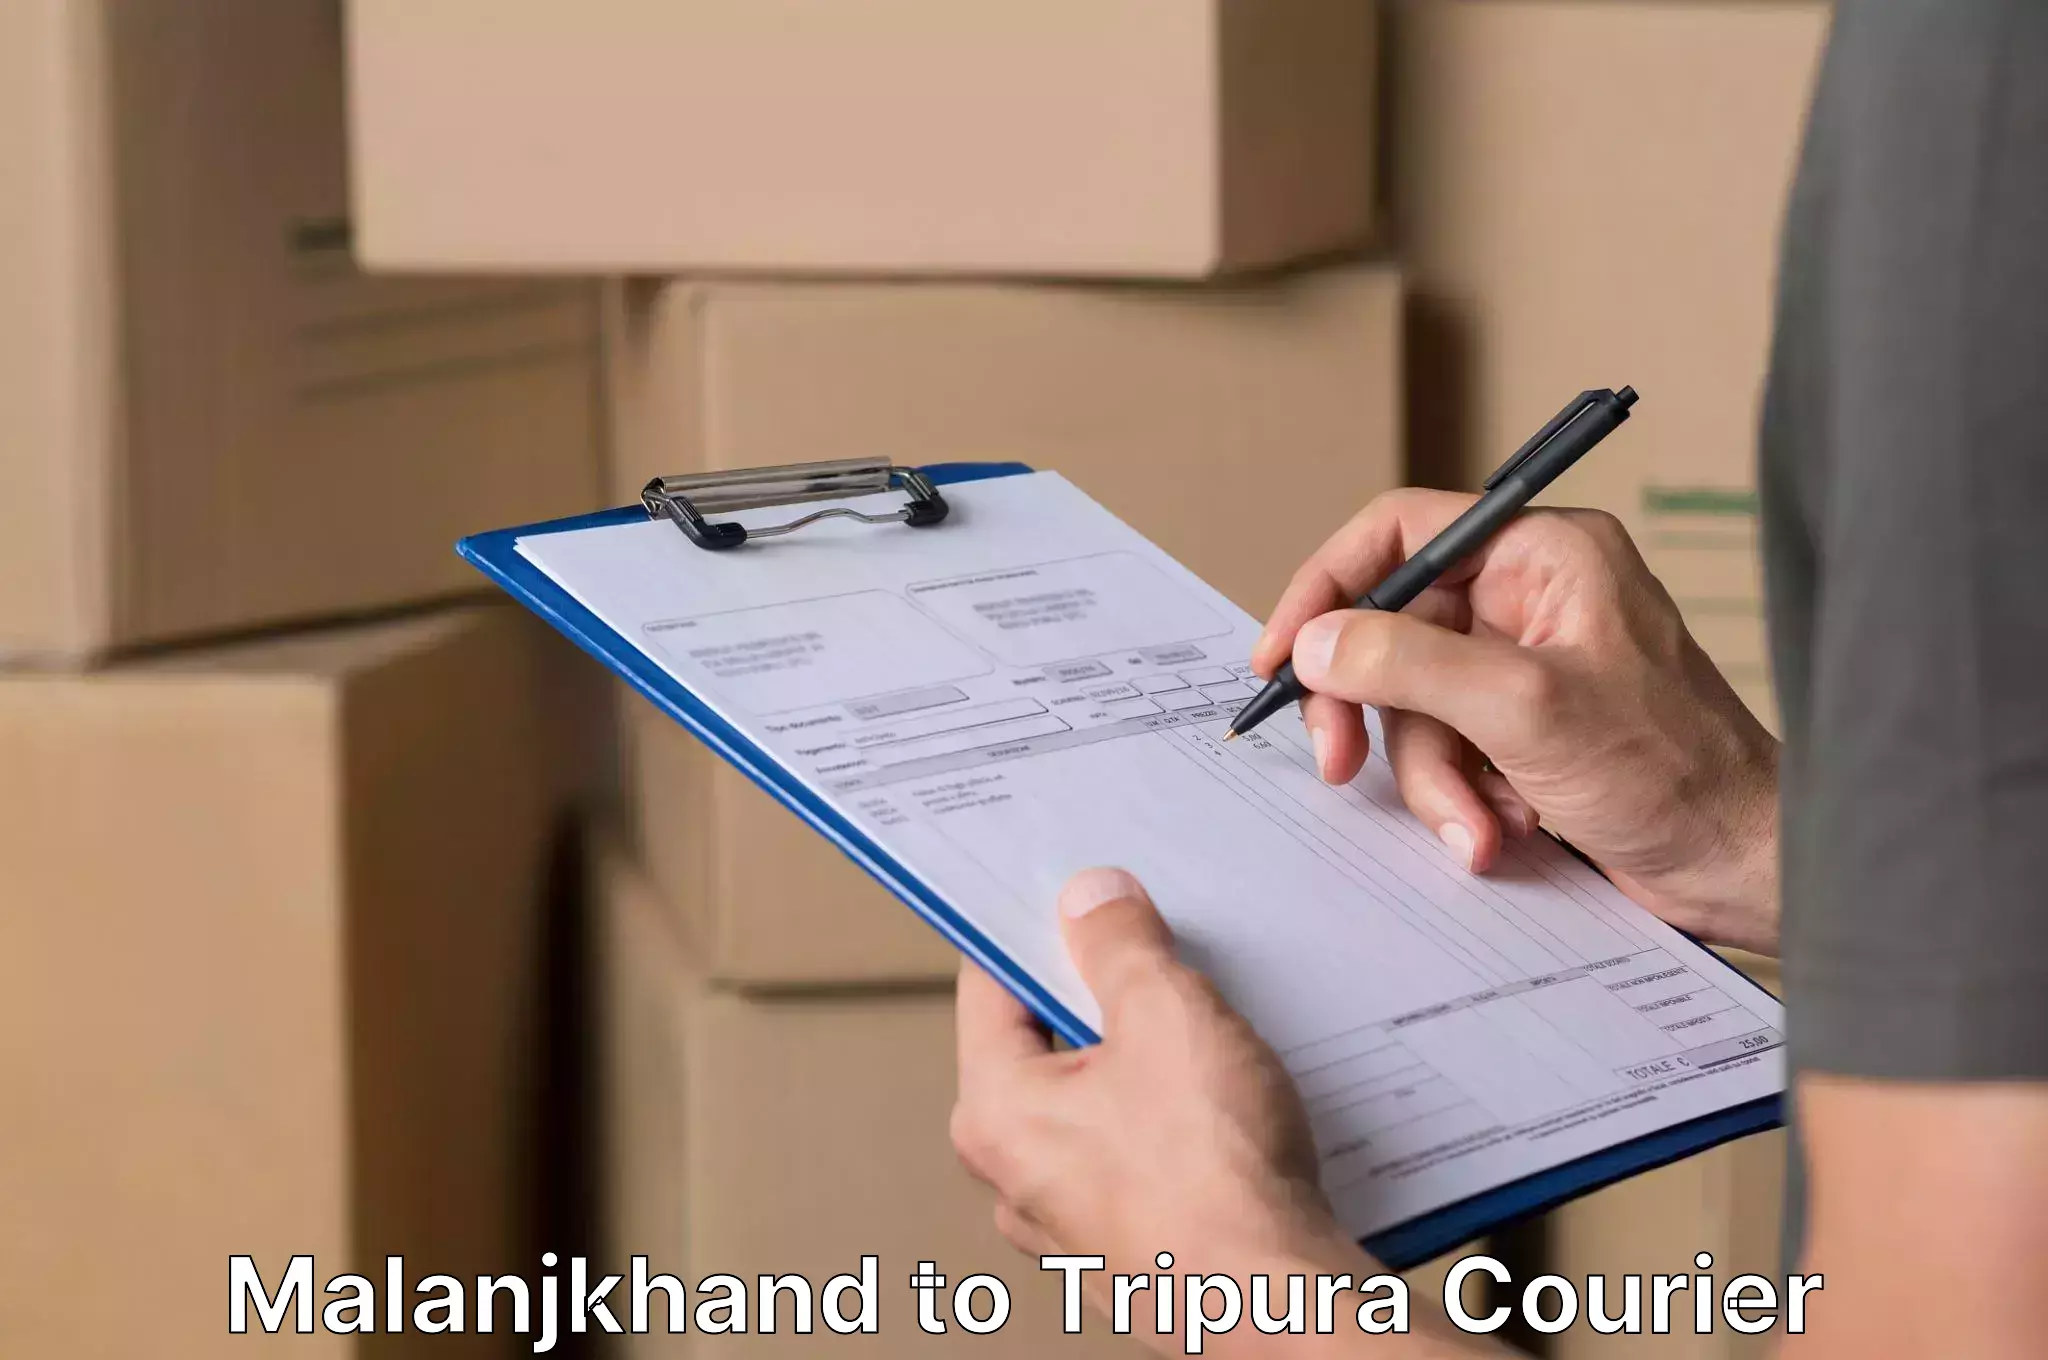 Efficient furniture movers Malanjkhand to Udaipur Tripura